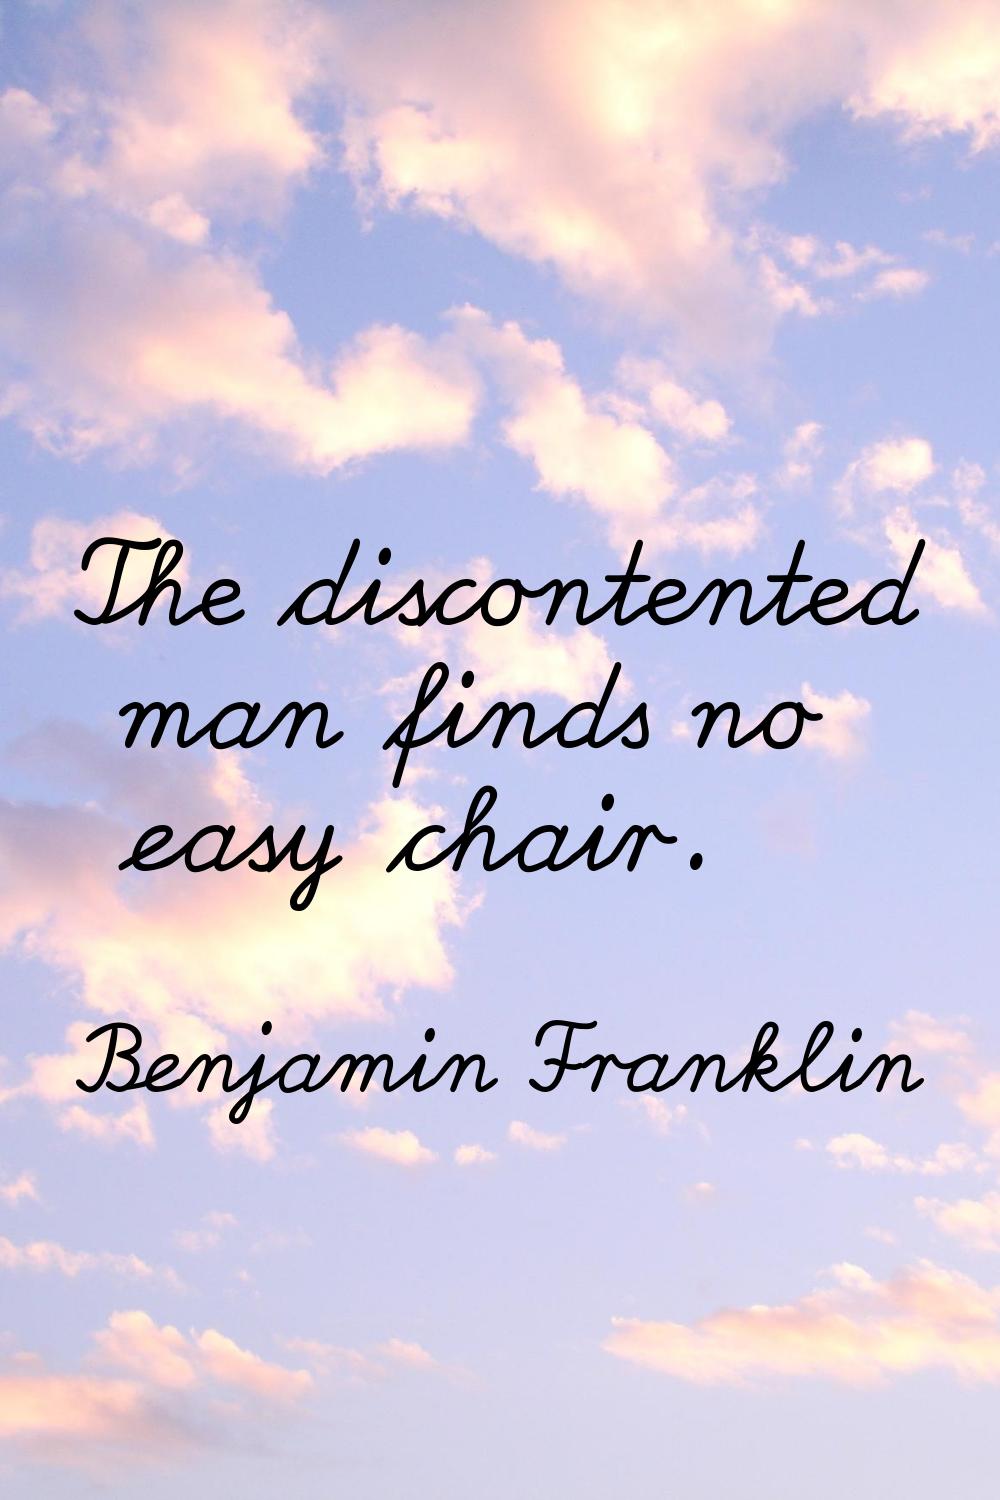 The discontented man finds no easy chair.